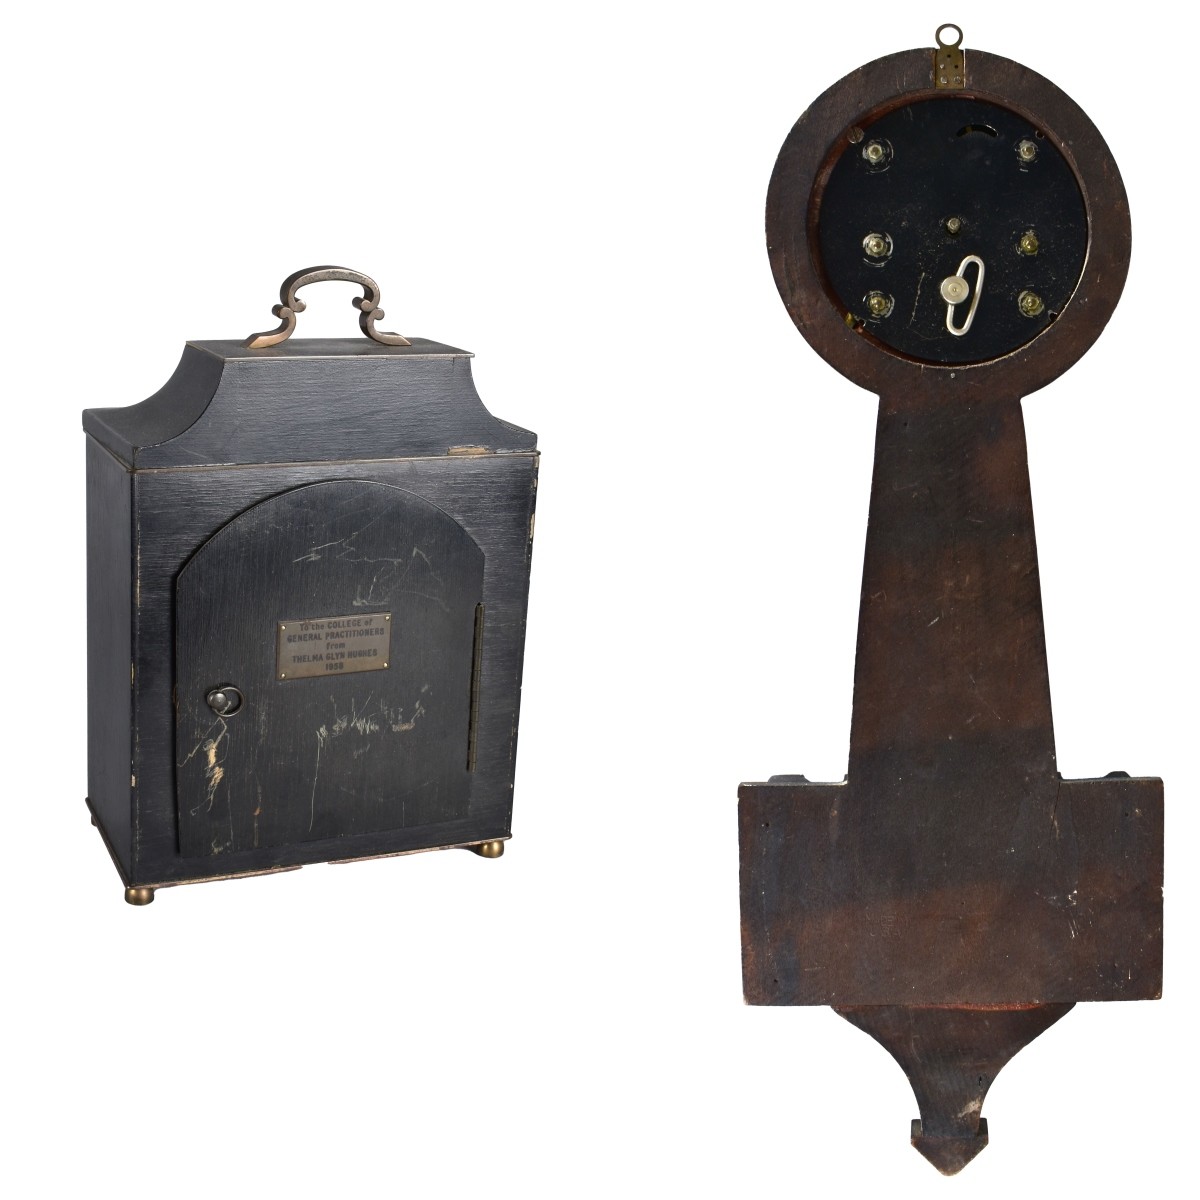 Grouping of Two Clocks